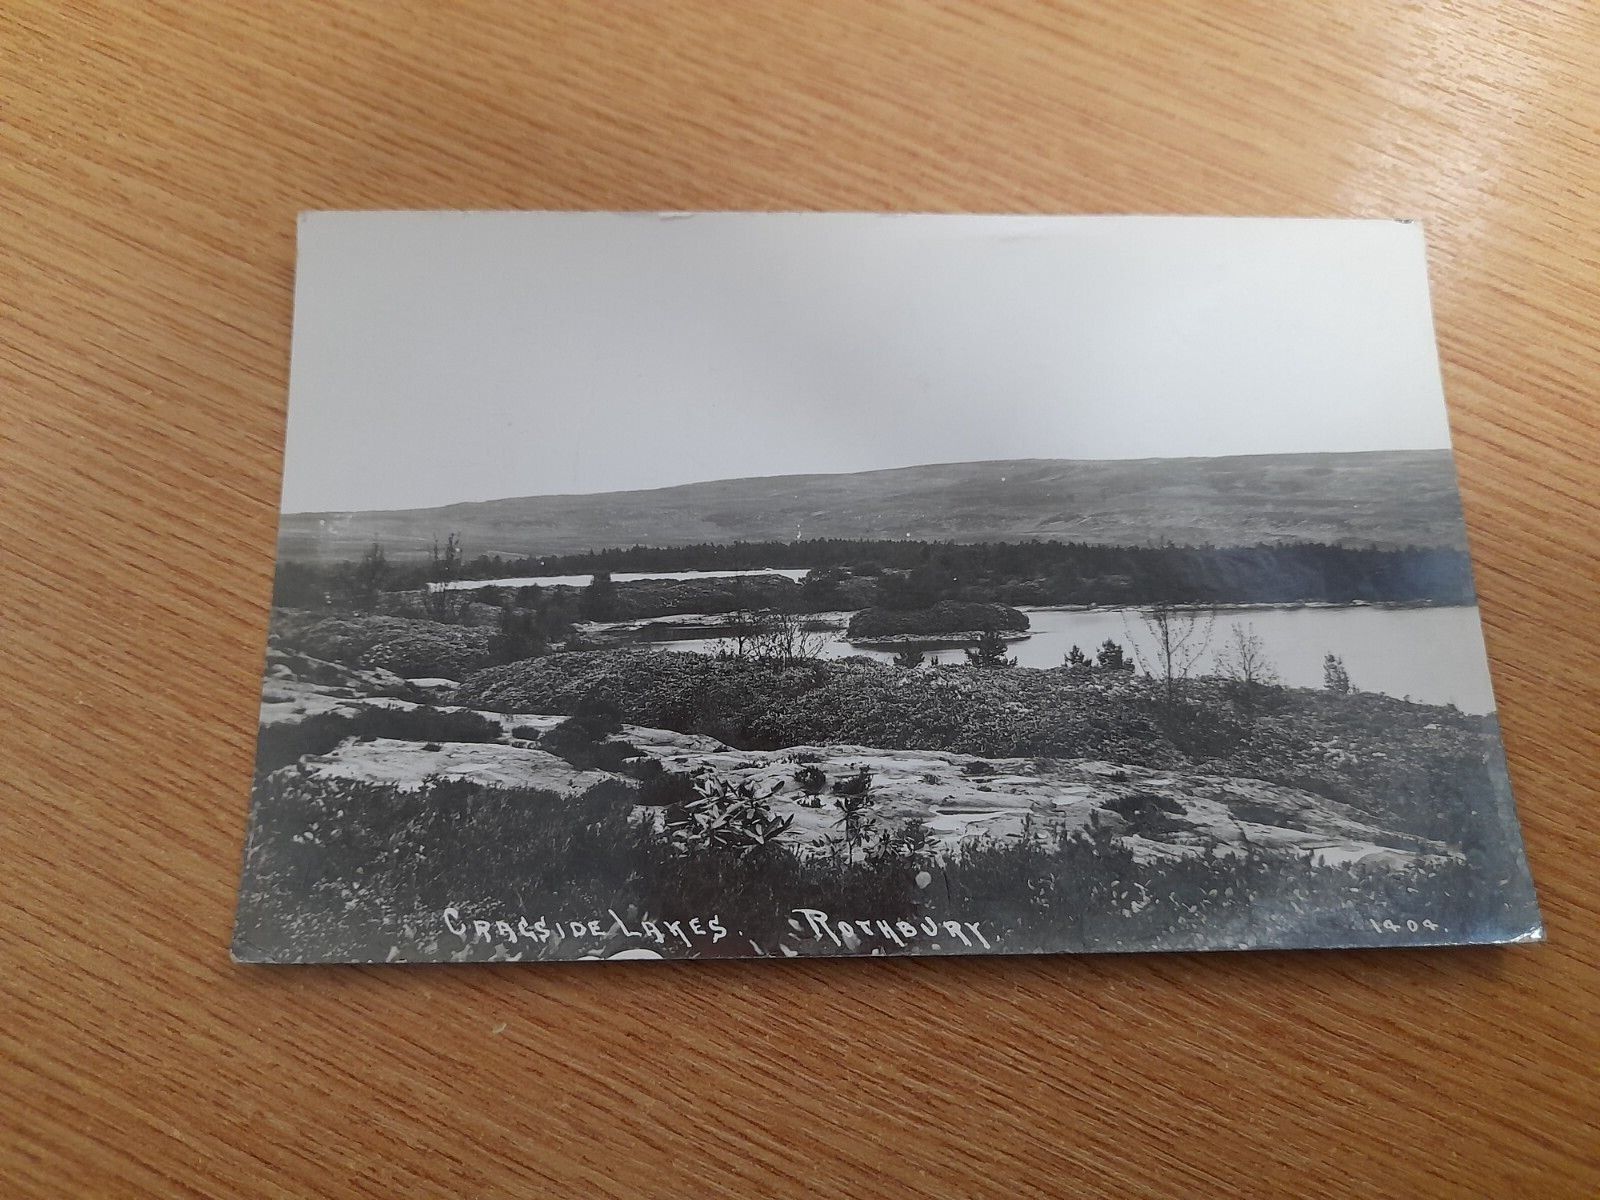 House Clearance - Cragside Lakes Rothbury Black & white photographic service No 1404 used 1936